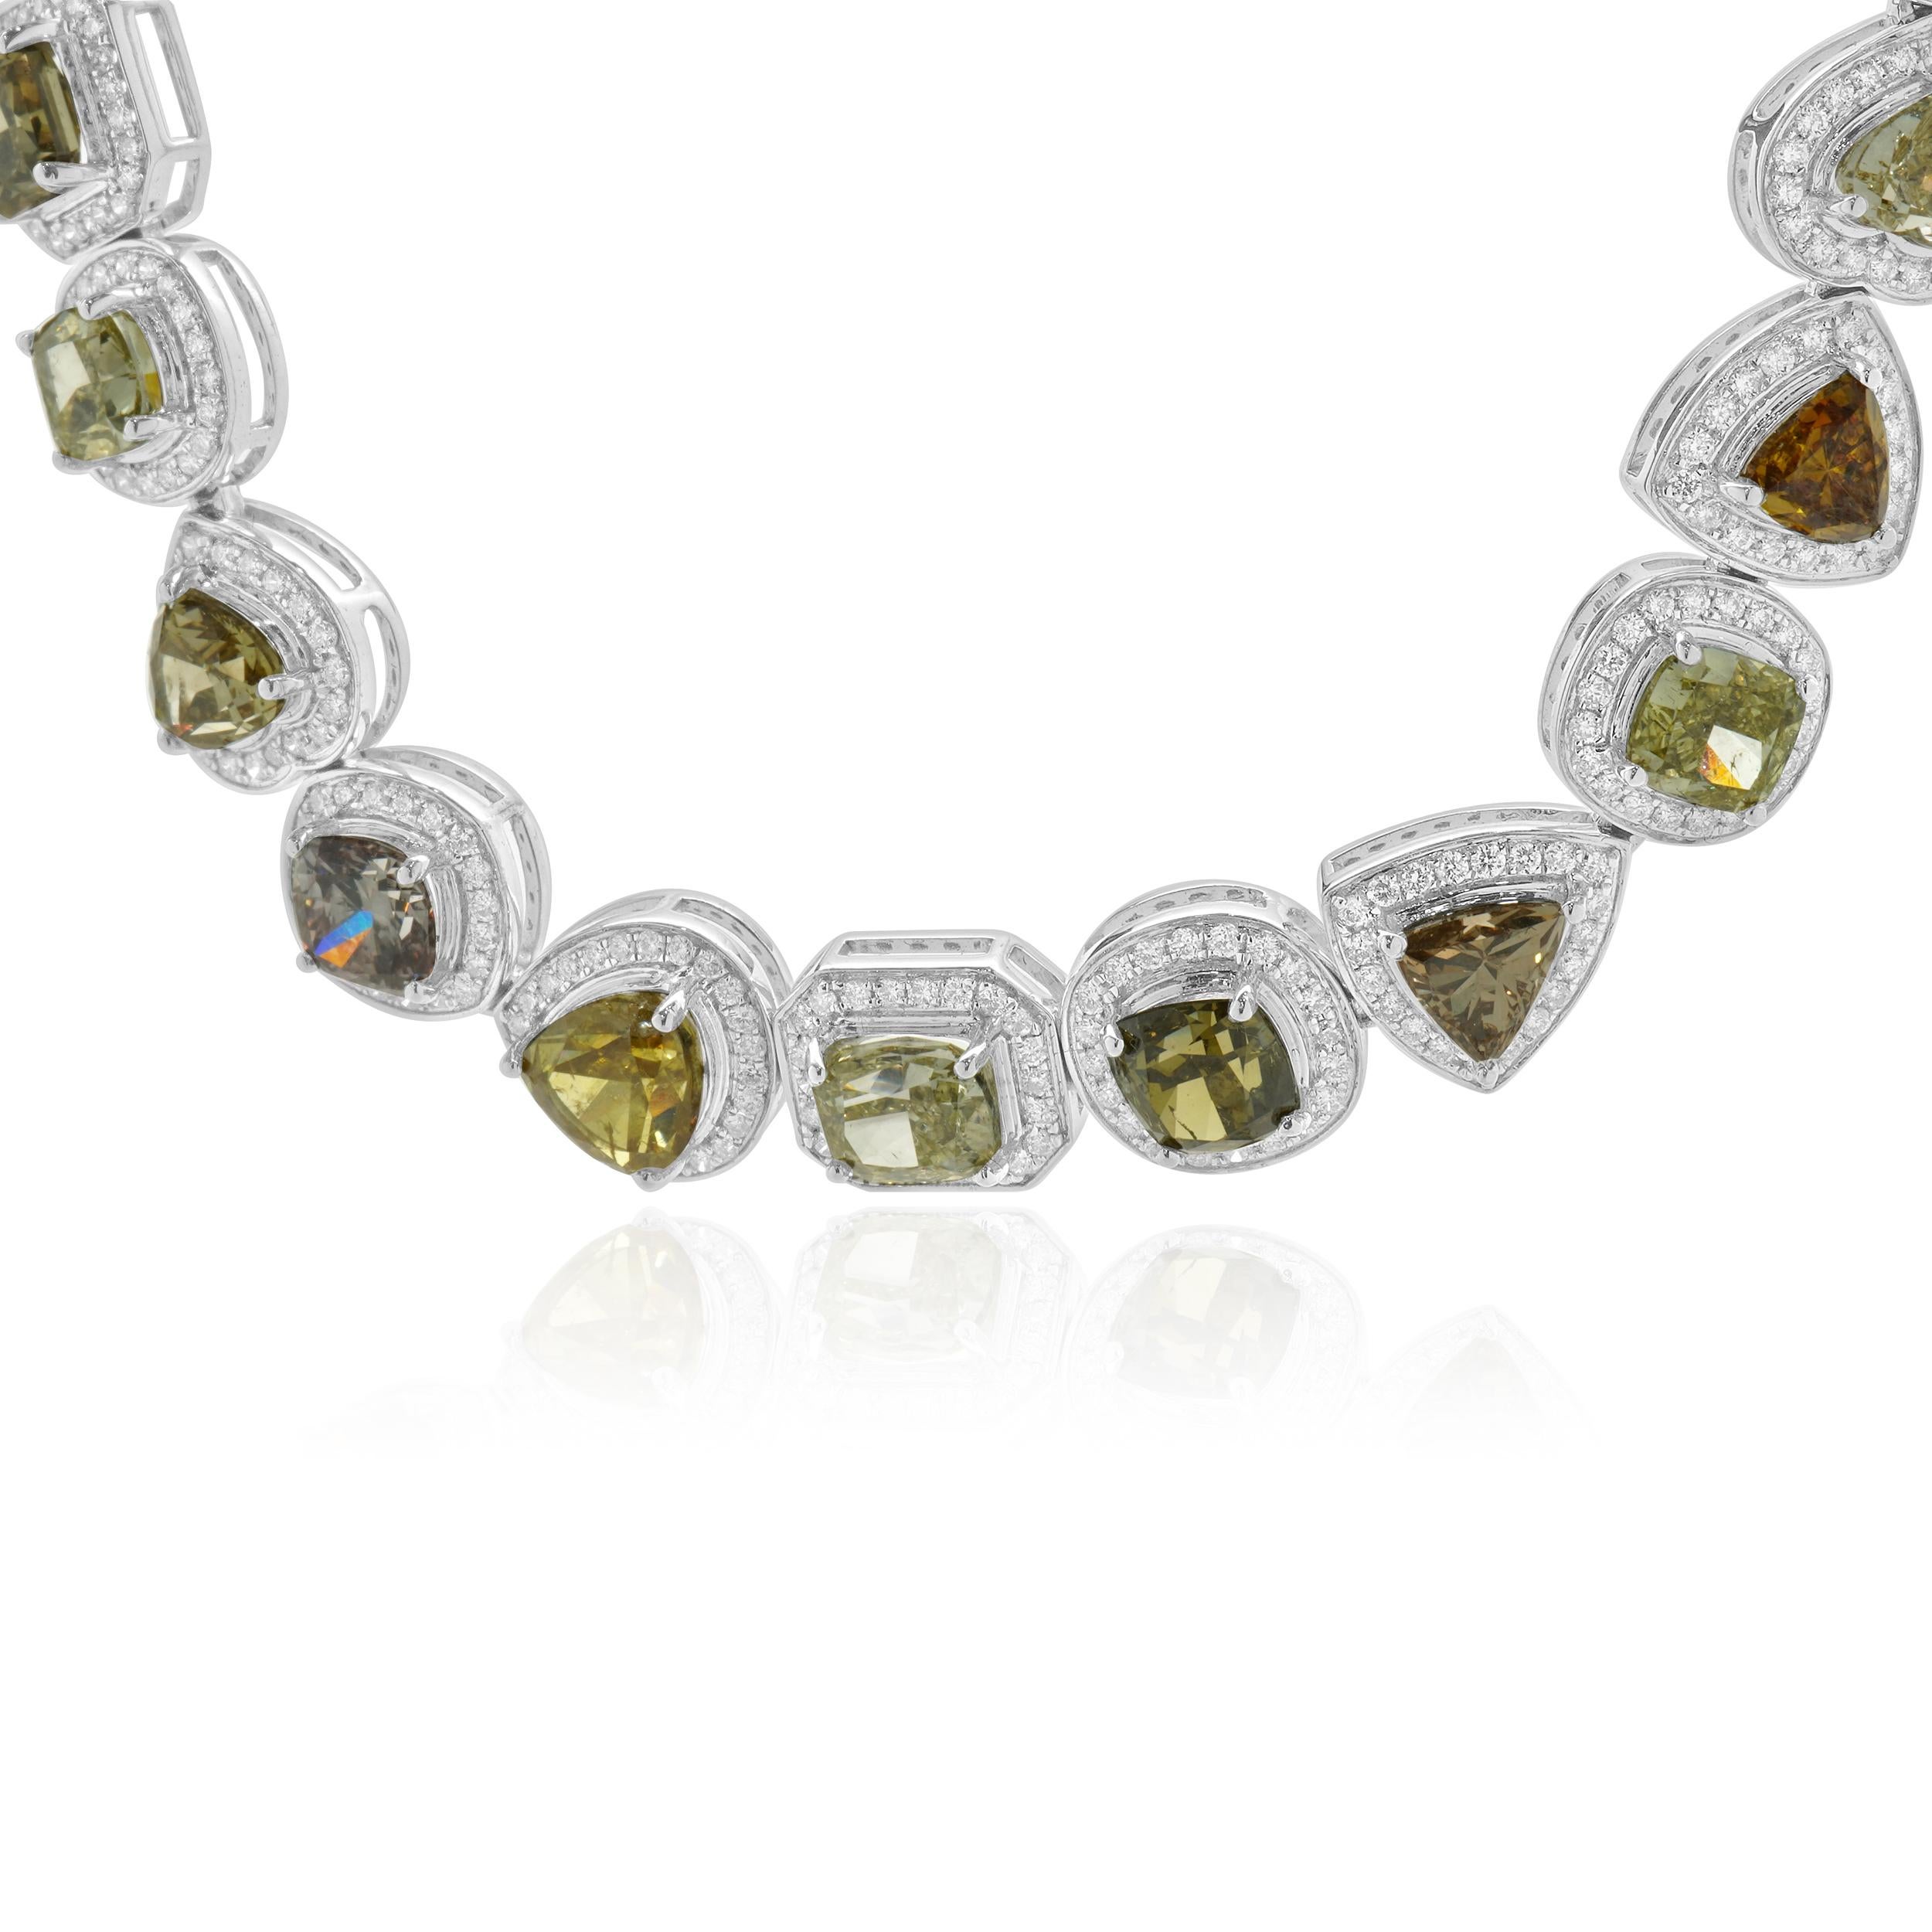 Designer: custom
Material: 14K white gold
Diamonds: 52 Multi-Colored/Shaped = 26.20cttw
Diamonds: round brilliant= 10.63cttw
Color: G
Clarity:VS- SI1
Dimensions: necklace measures 16-inches in length 
Weight: 36.03 grams